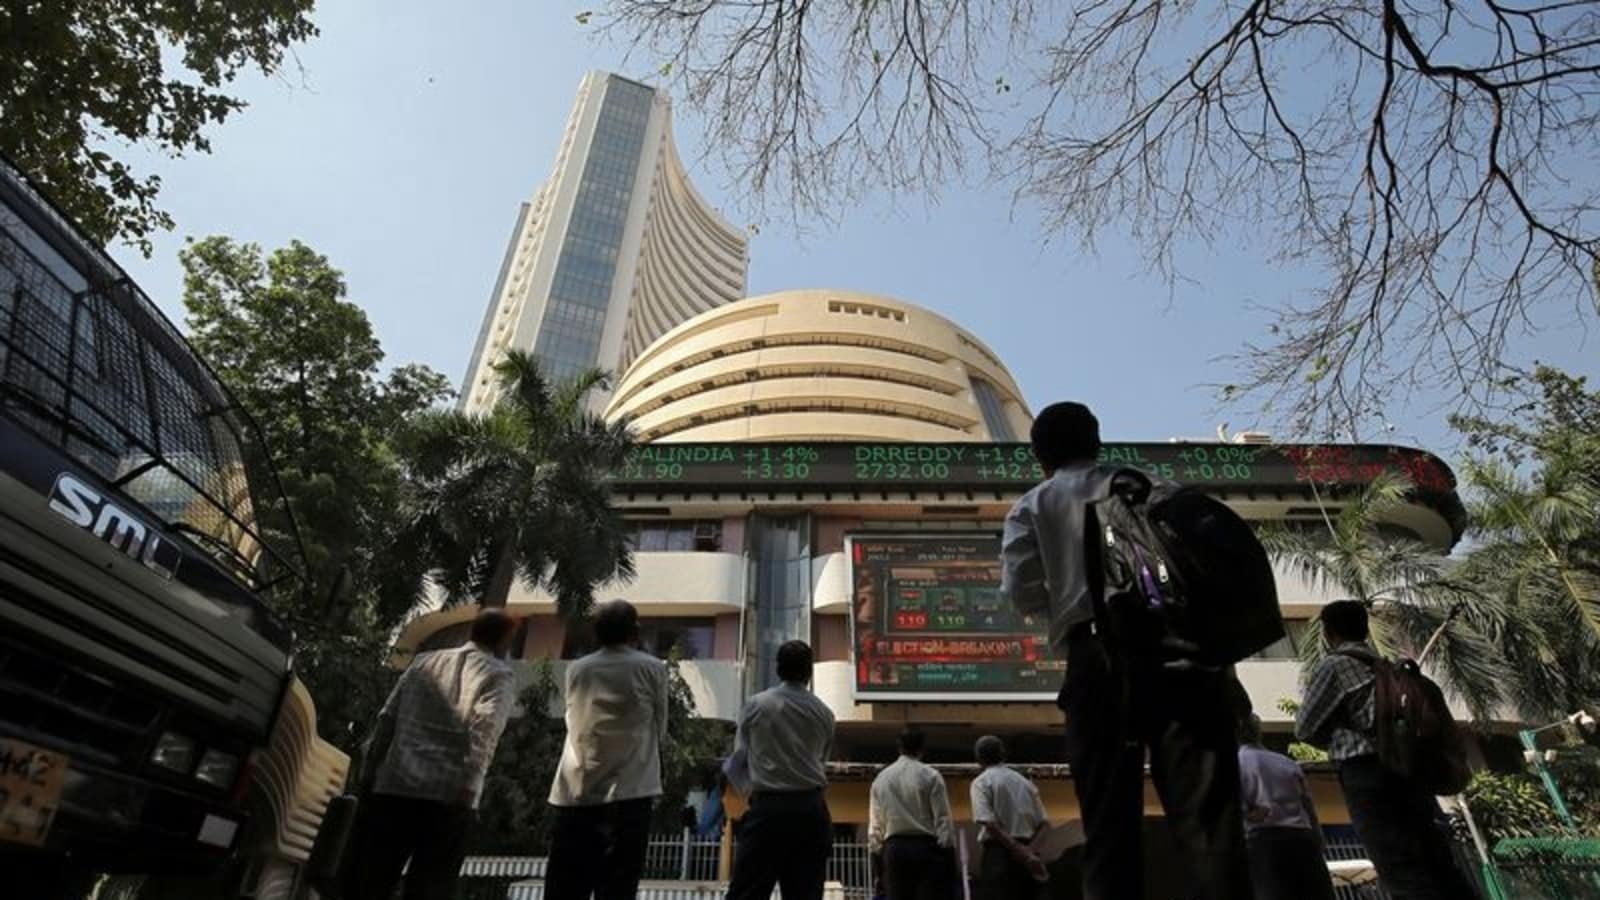 Sensex tanks 571 points to close at 57,292, Nifty ends session at 17,112